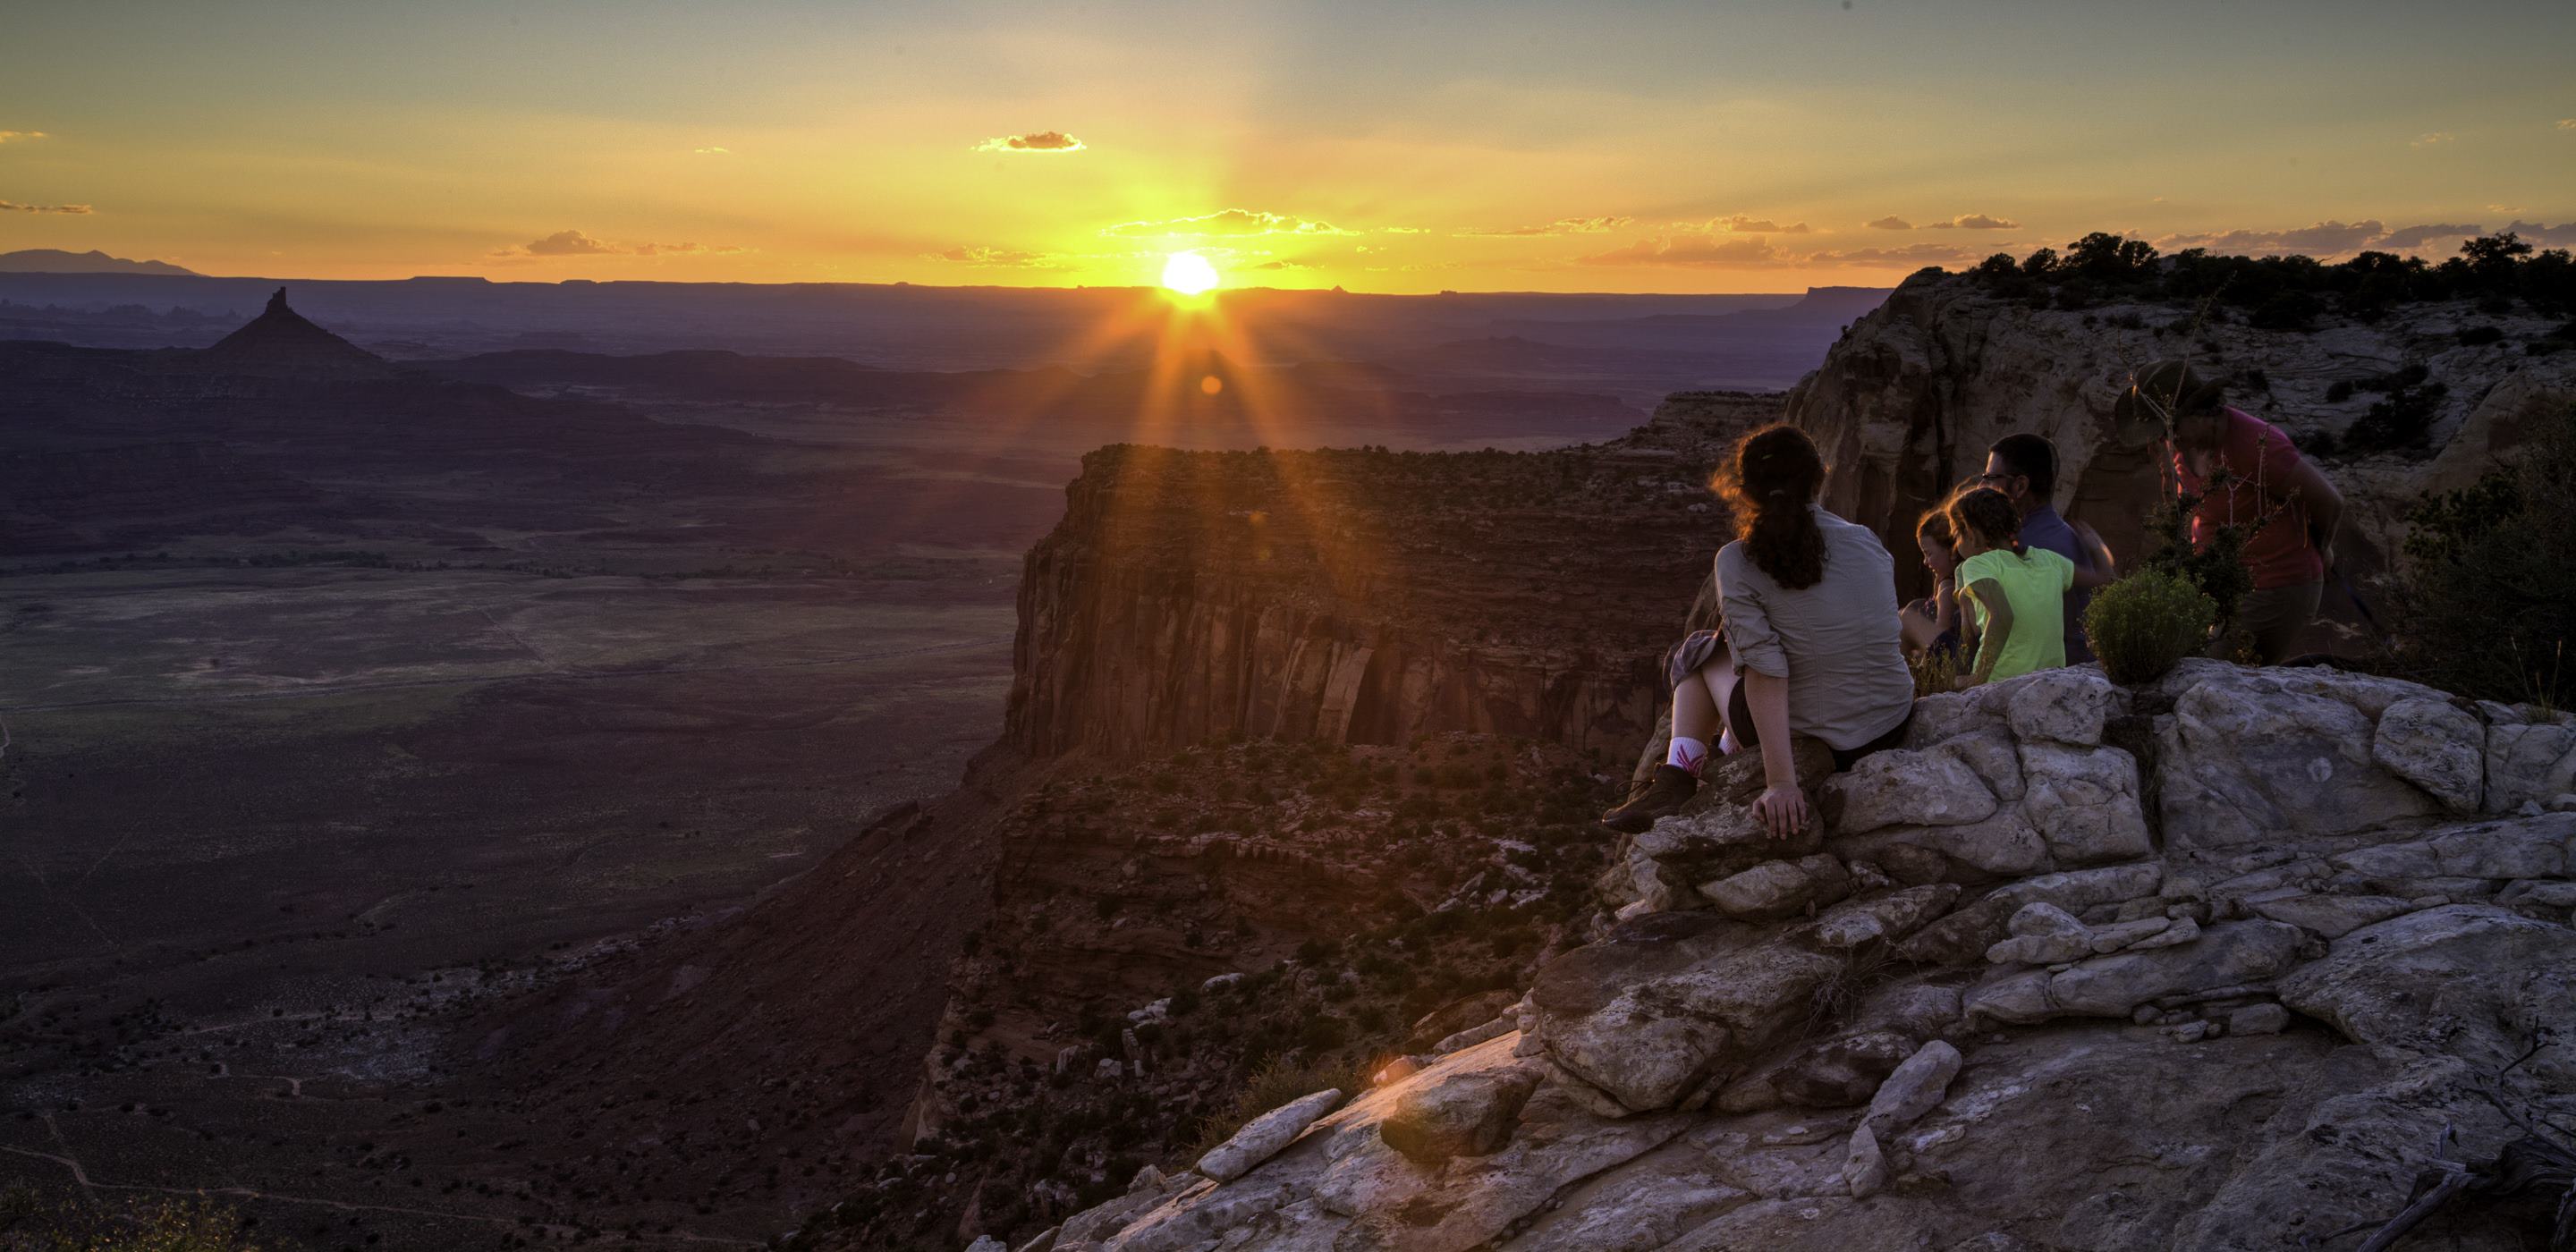 Hikers enjoy the sunset from a cliff overlooking a valley